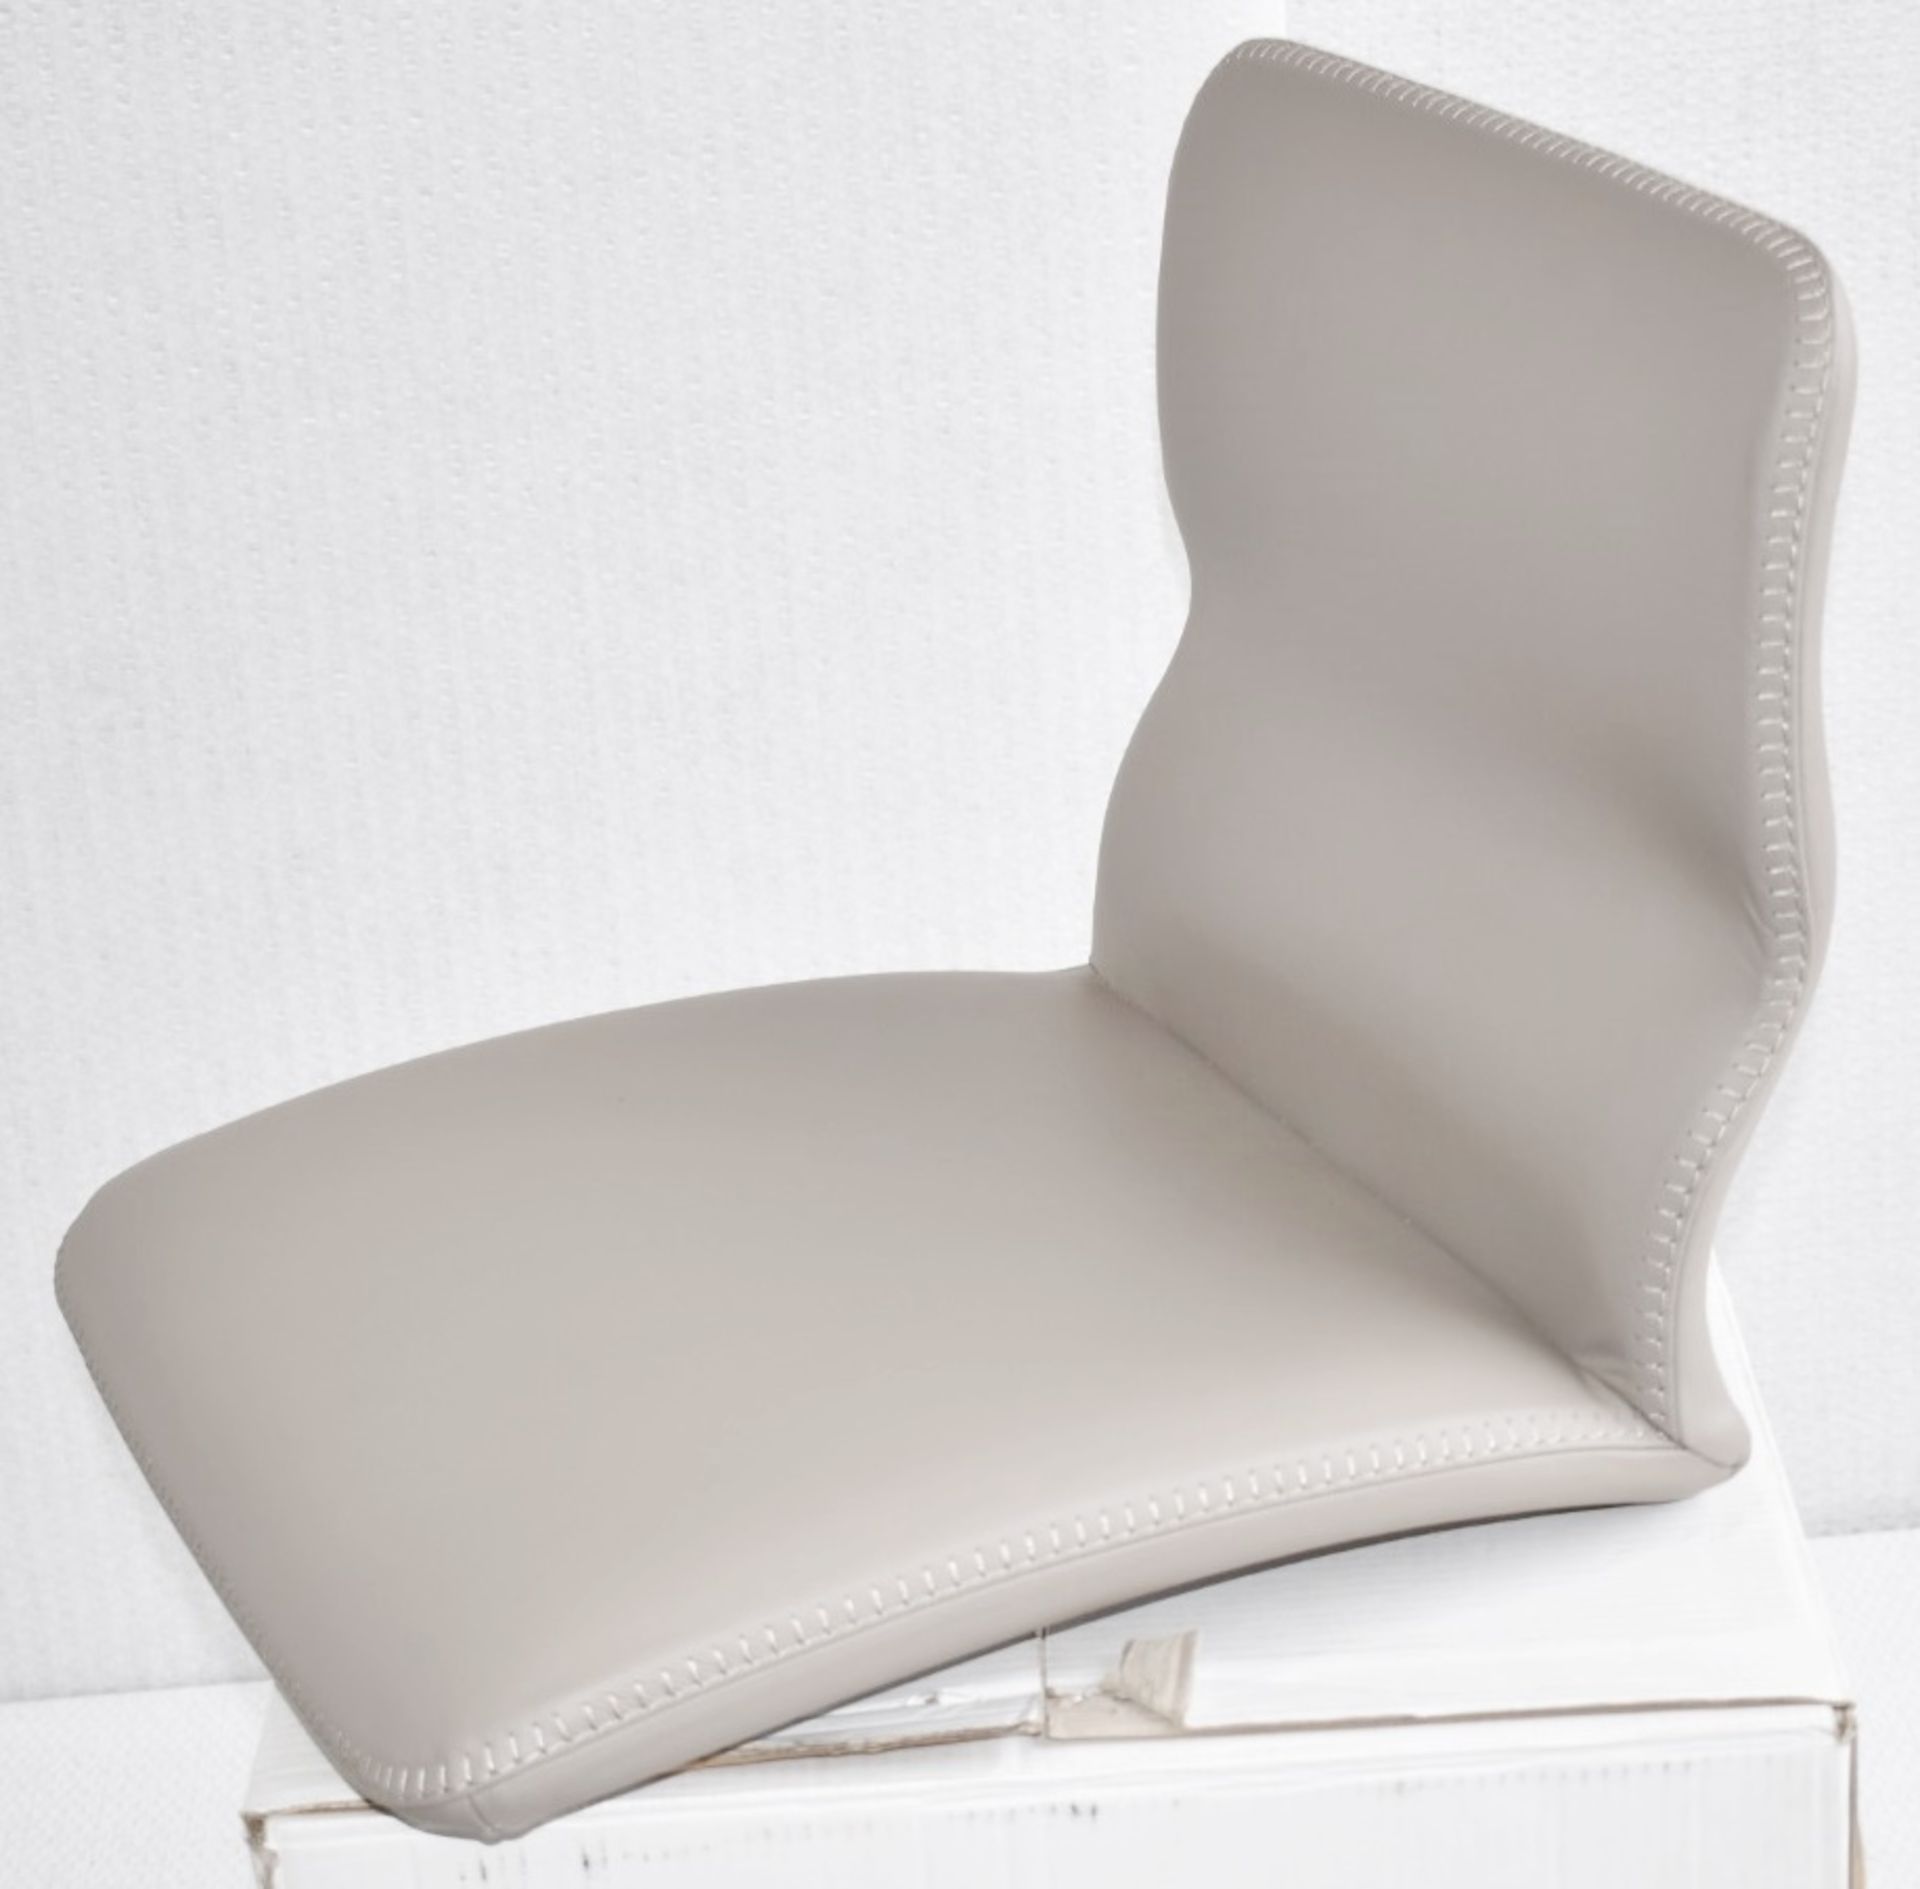 1 x CATTELAN ITALIA Designer Leather Upholstered Seat For Victor Stool, in Light Taupe - Image 6 of 7